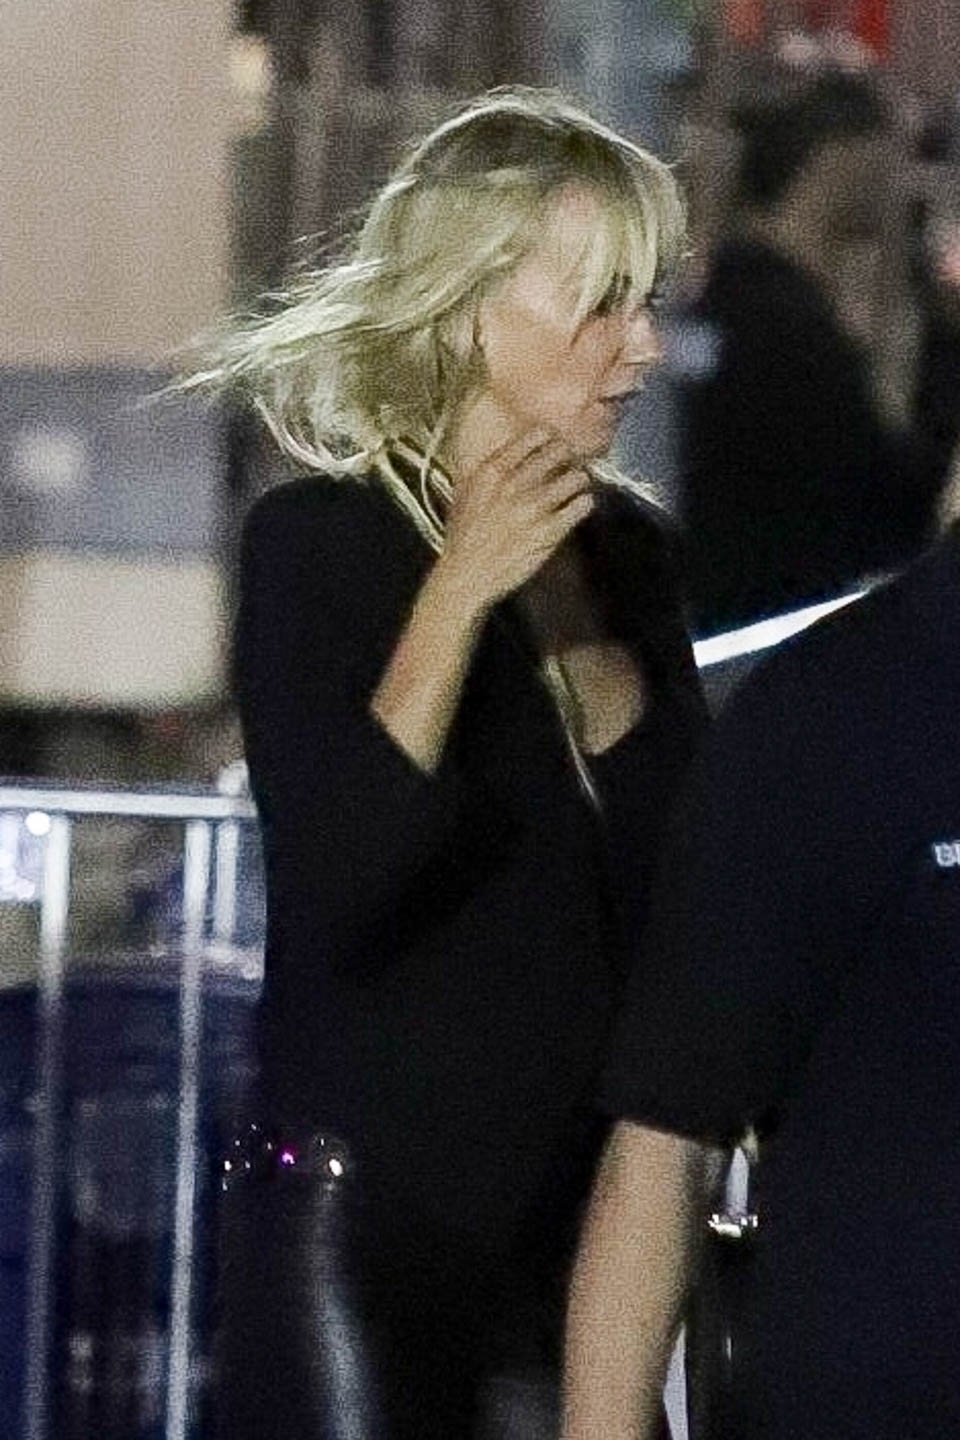 Kimberly Stewart at Rolling Stones concert